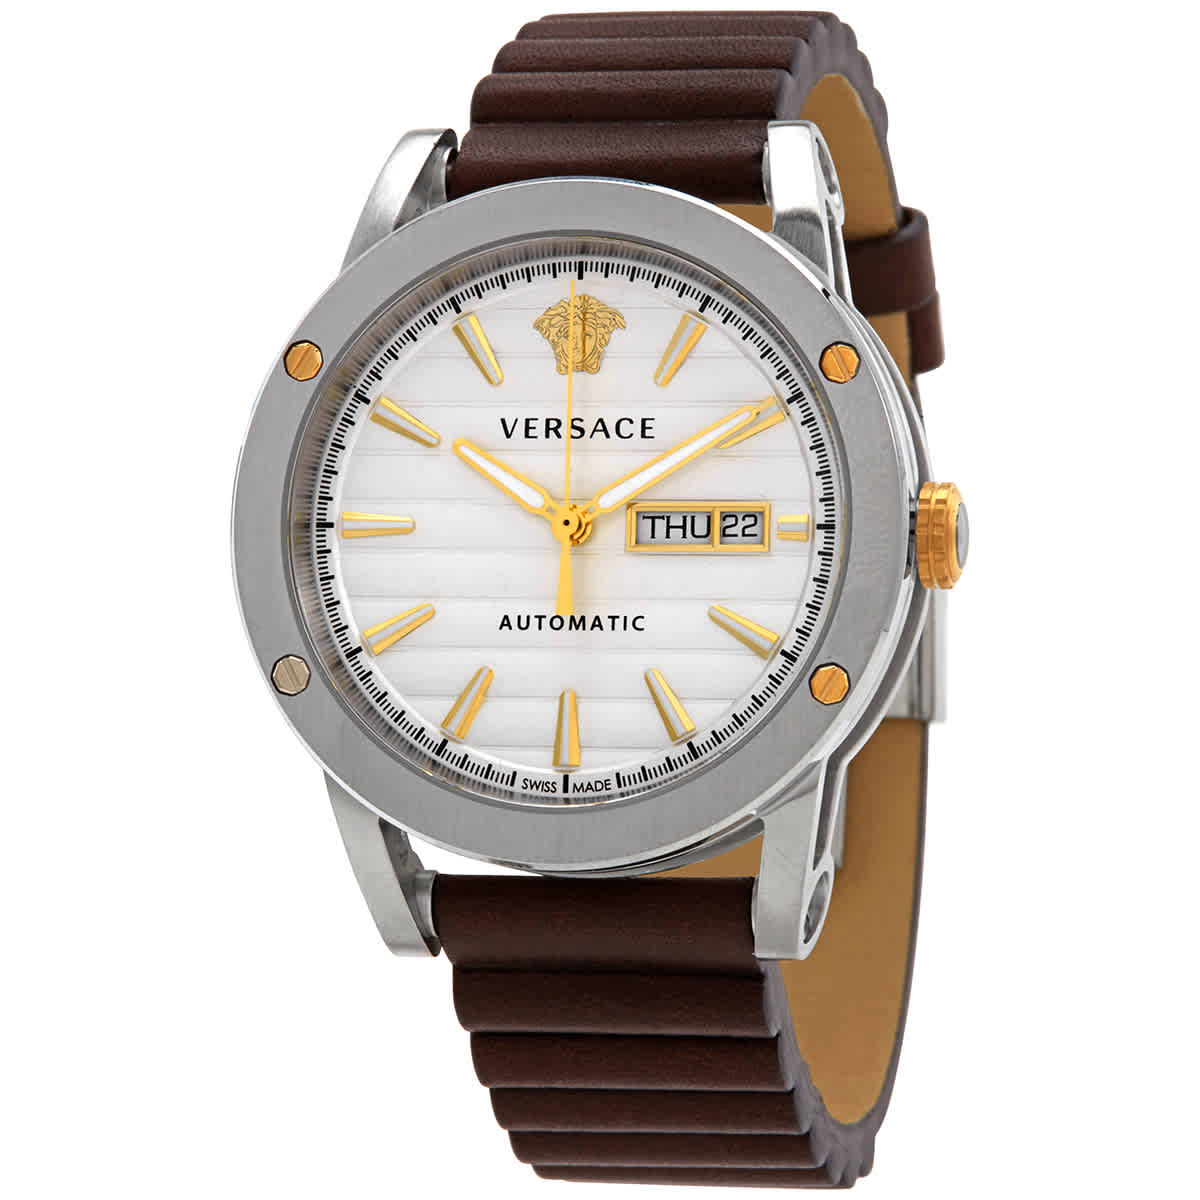 Versace Theros Automatic White Dial Mens Watch Vedx00119 In Brown,gold Tone,silver Tone,white